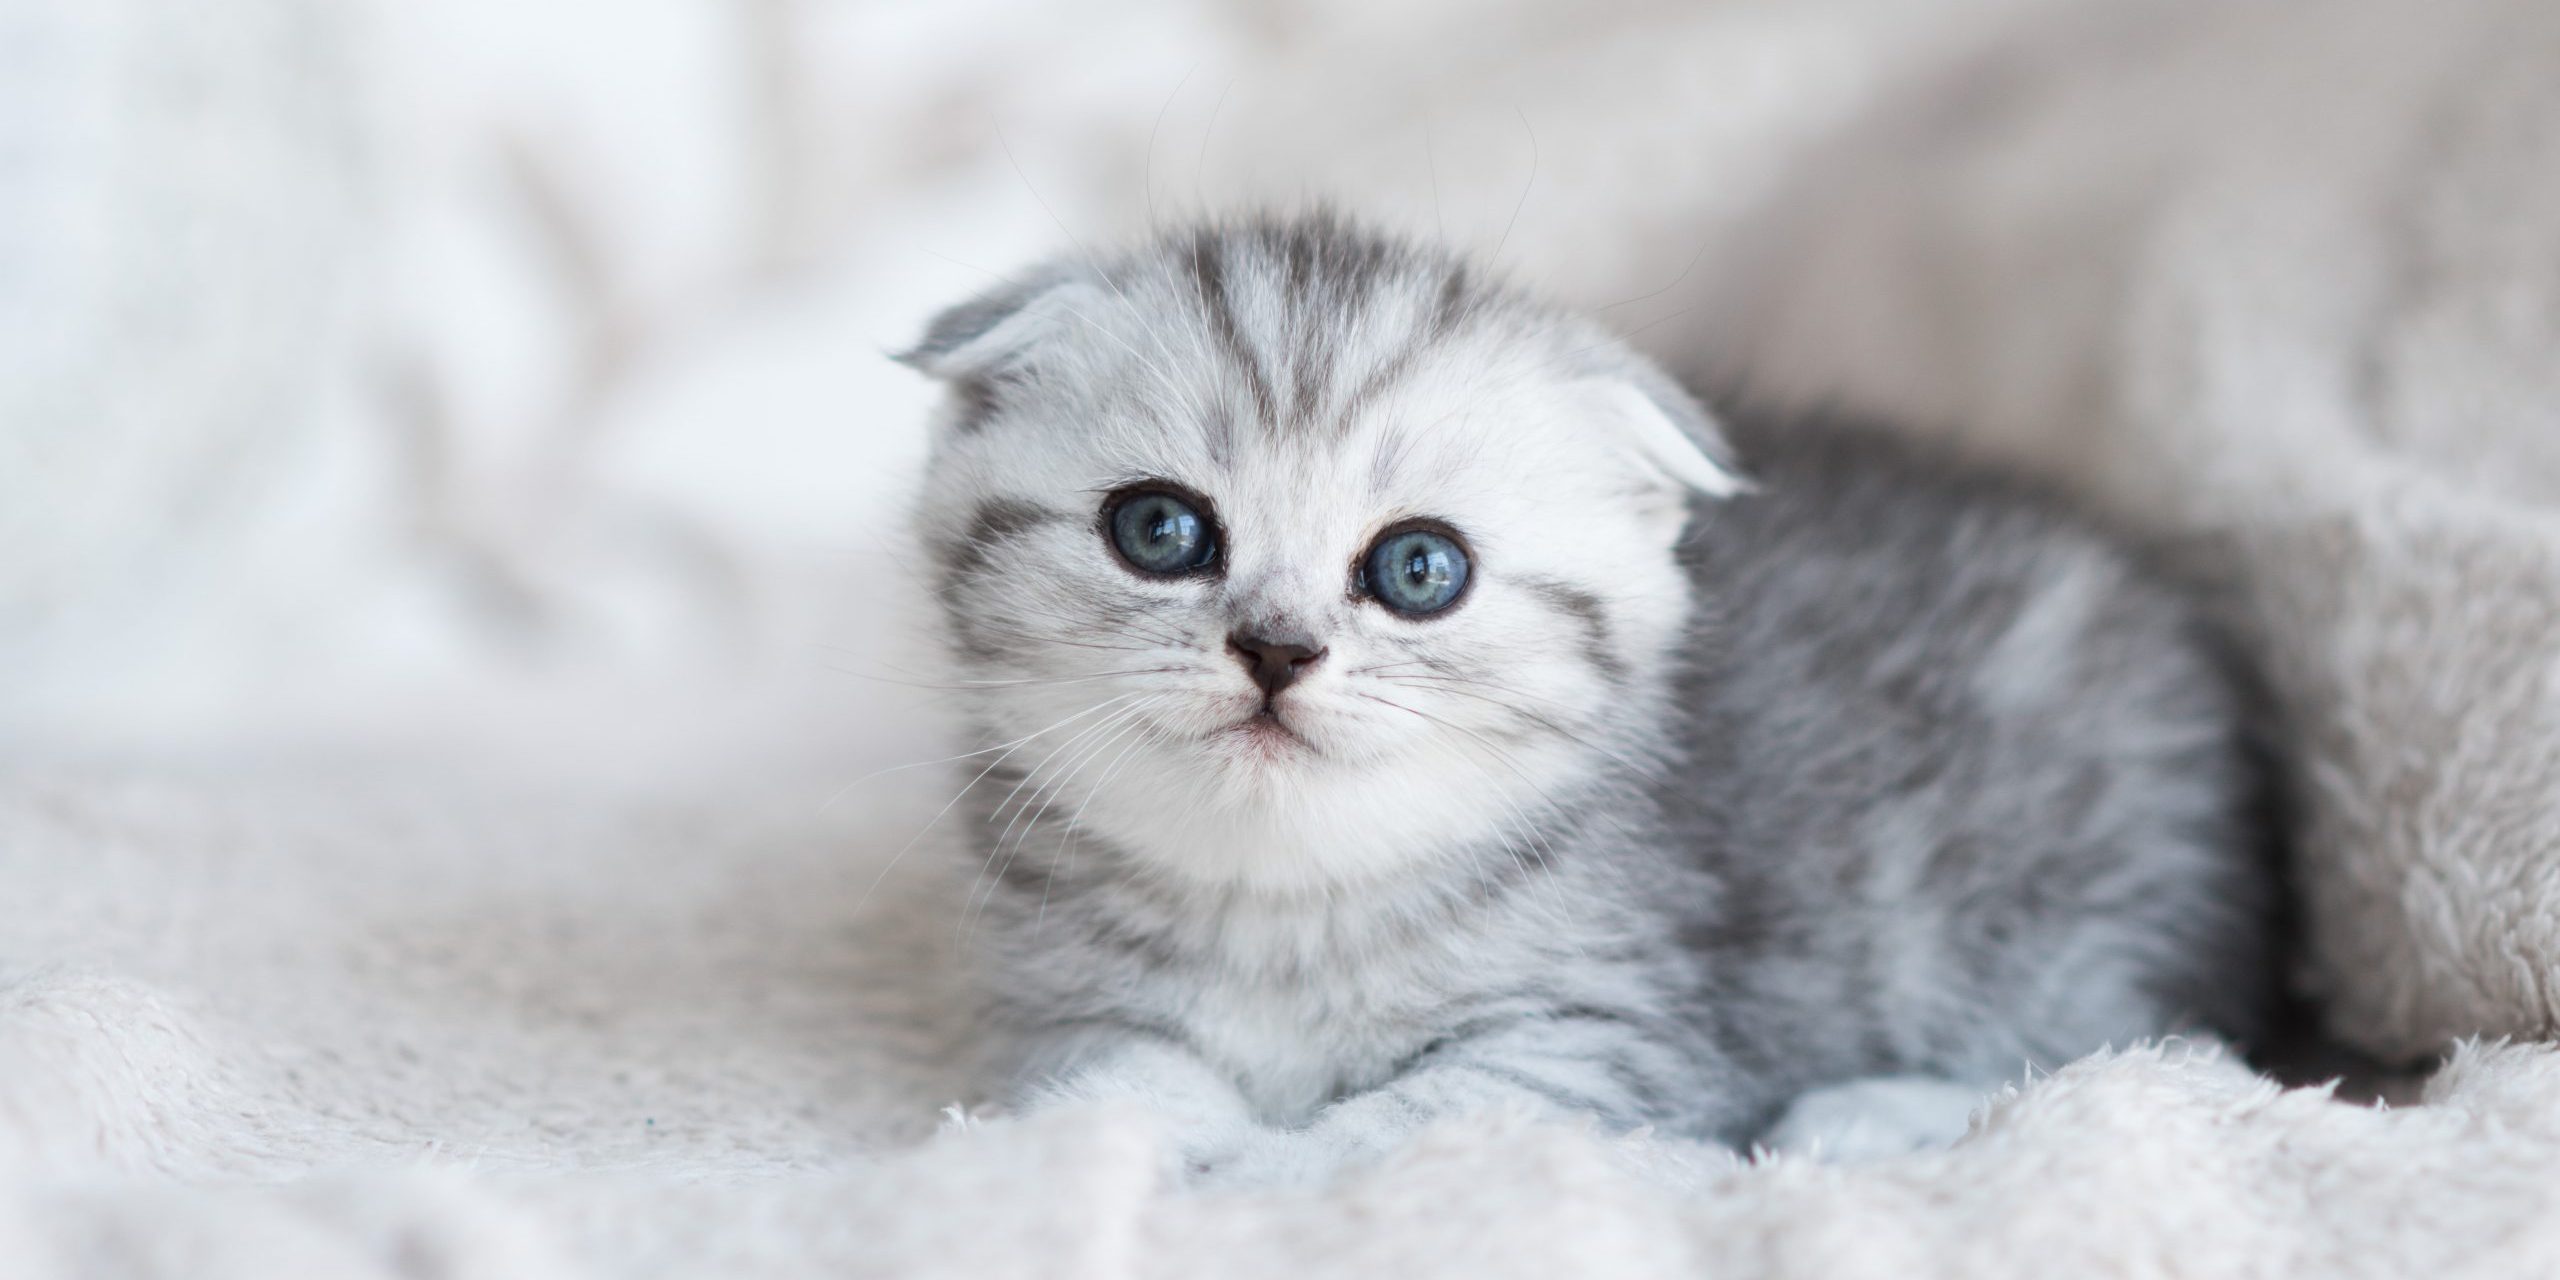 Little grey kitten with blue eyes lies on the grey couch